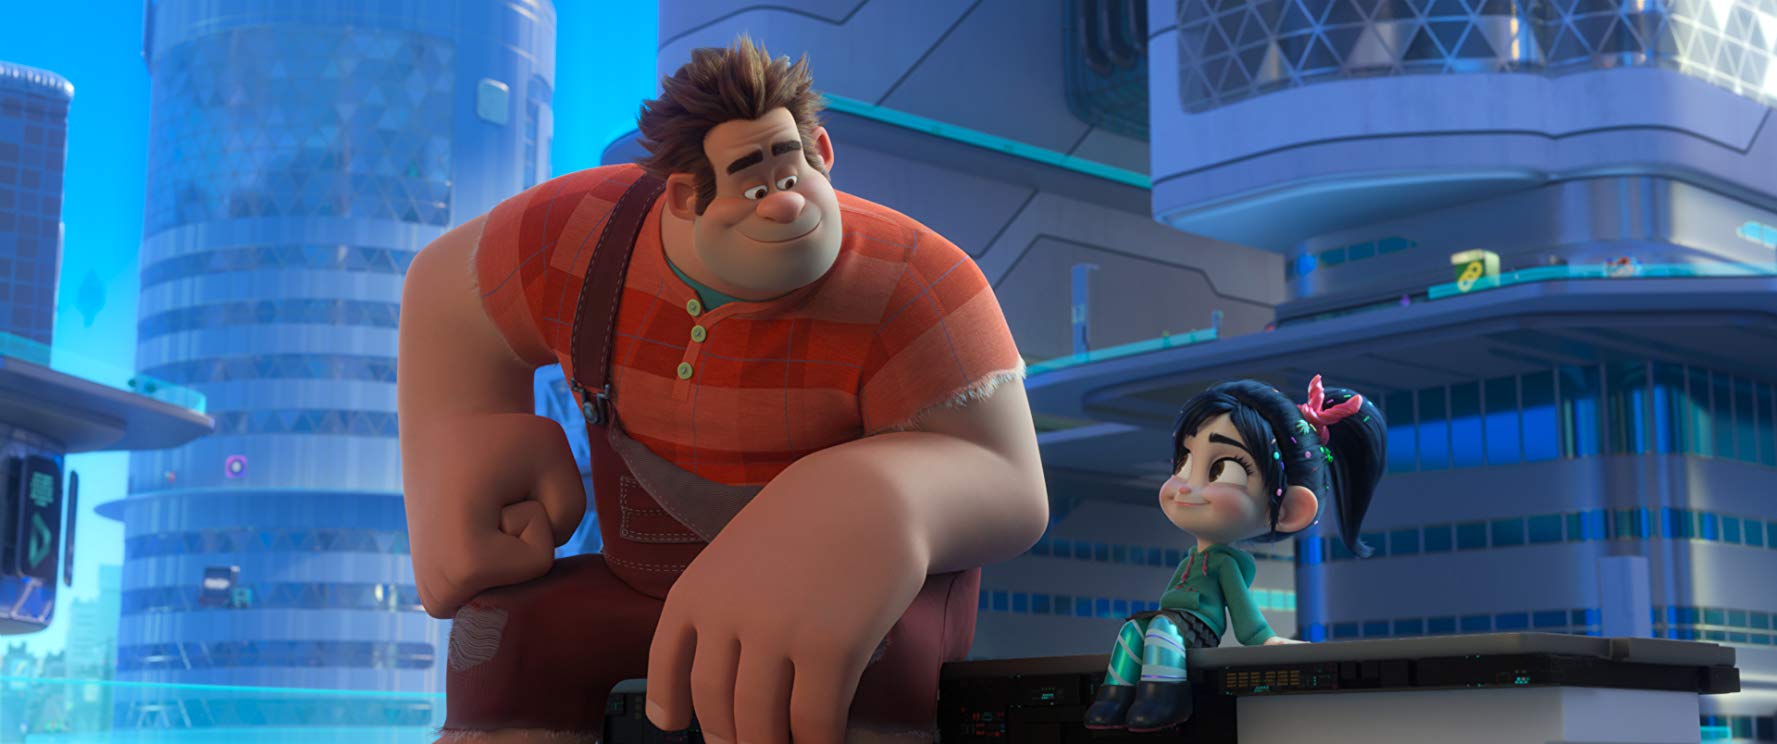 Movie still of Wreck-It Ralph and Venellope